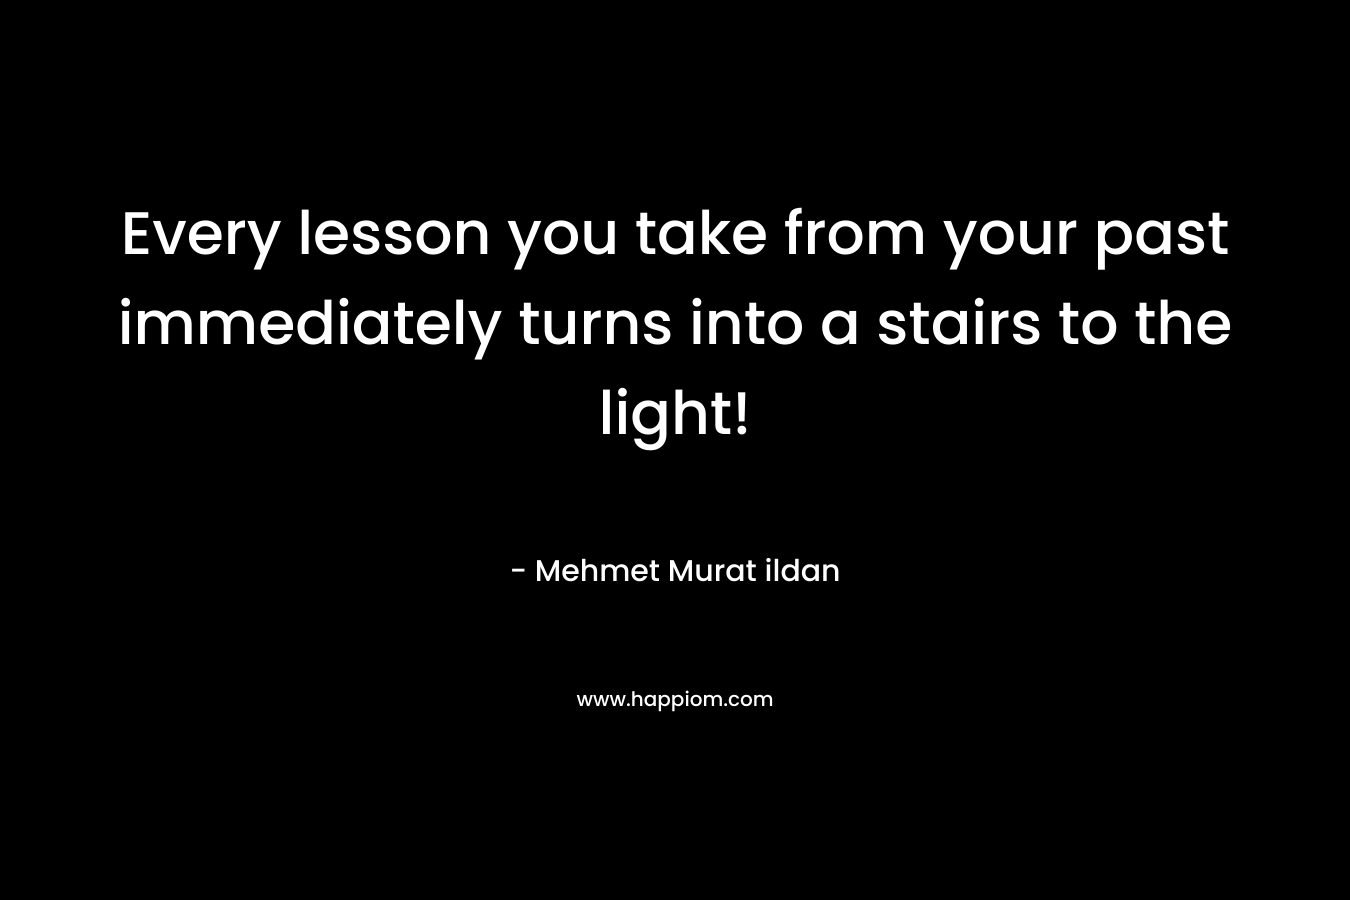 Every lesson you take from your past immediately turns into a stairs to the light! – Mehmet Murat ildan